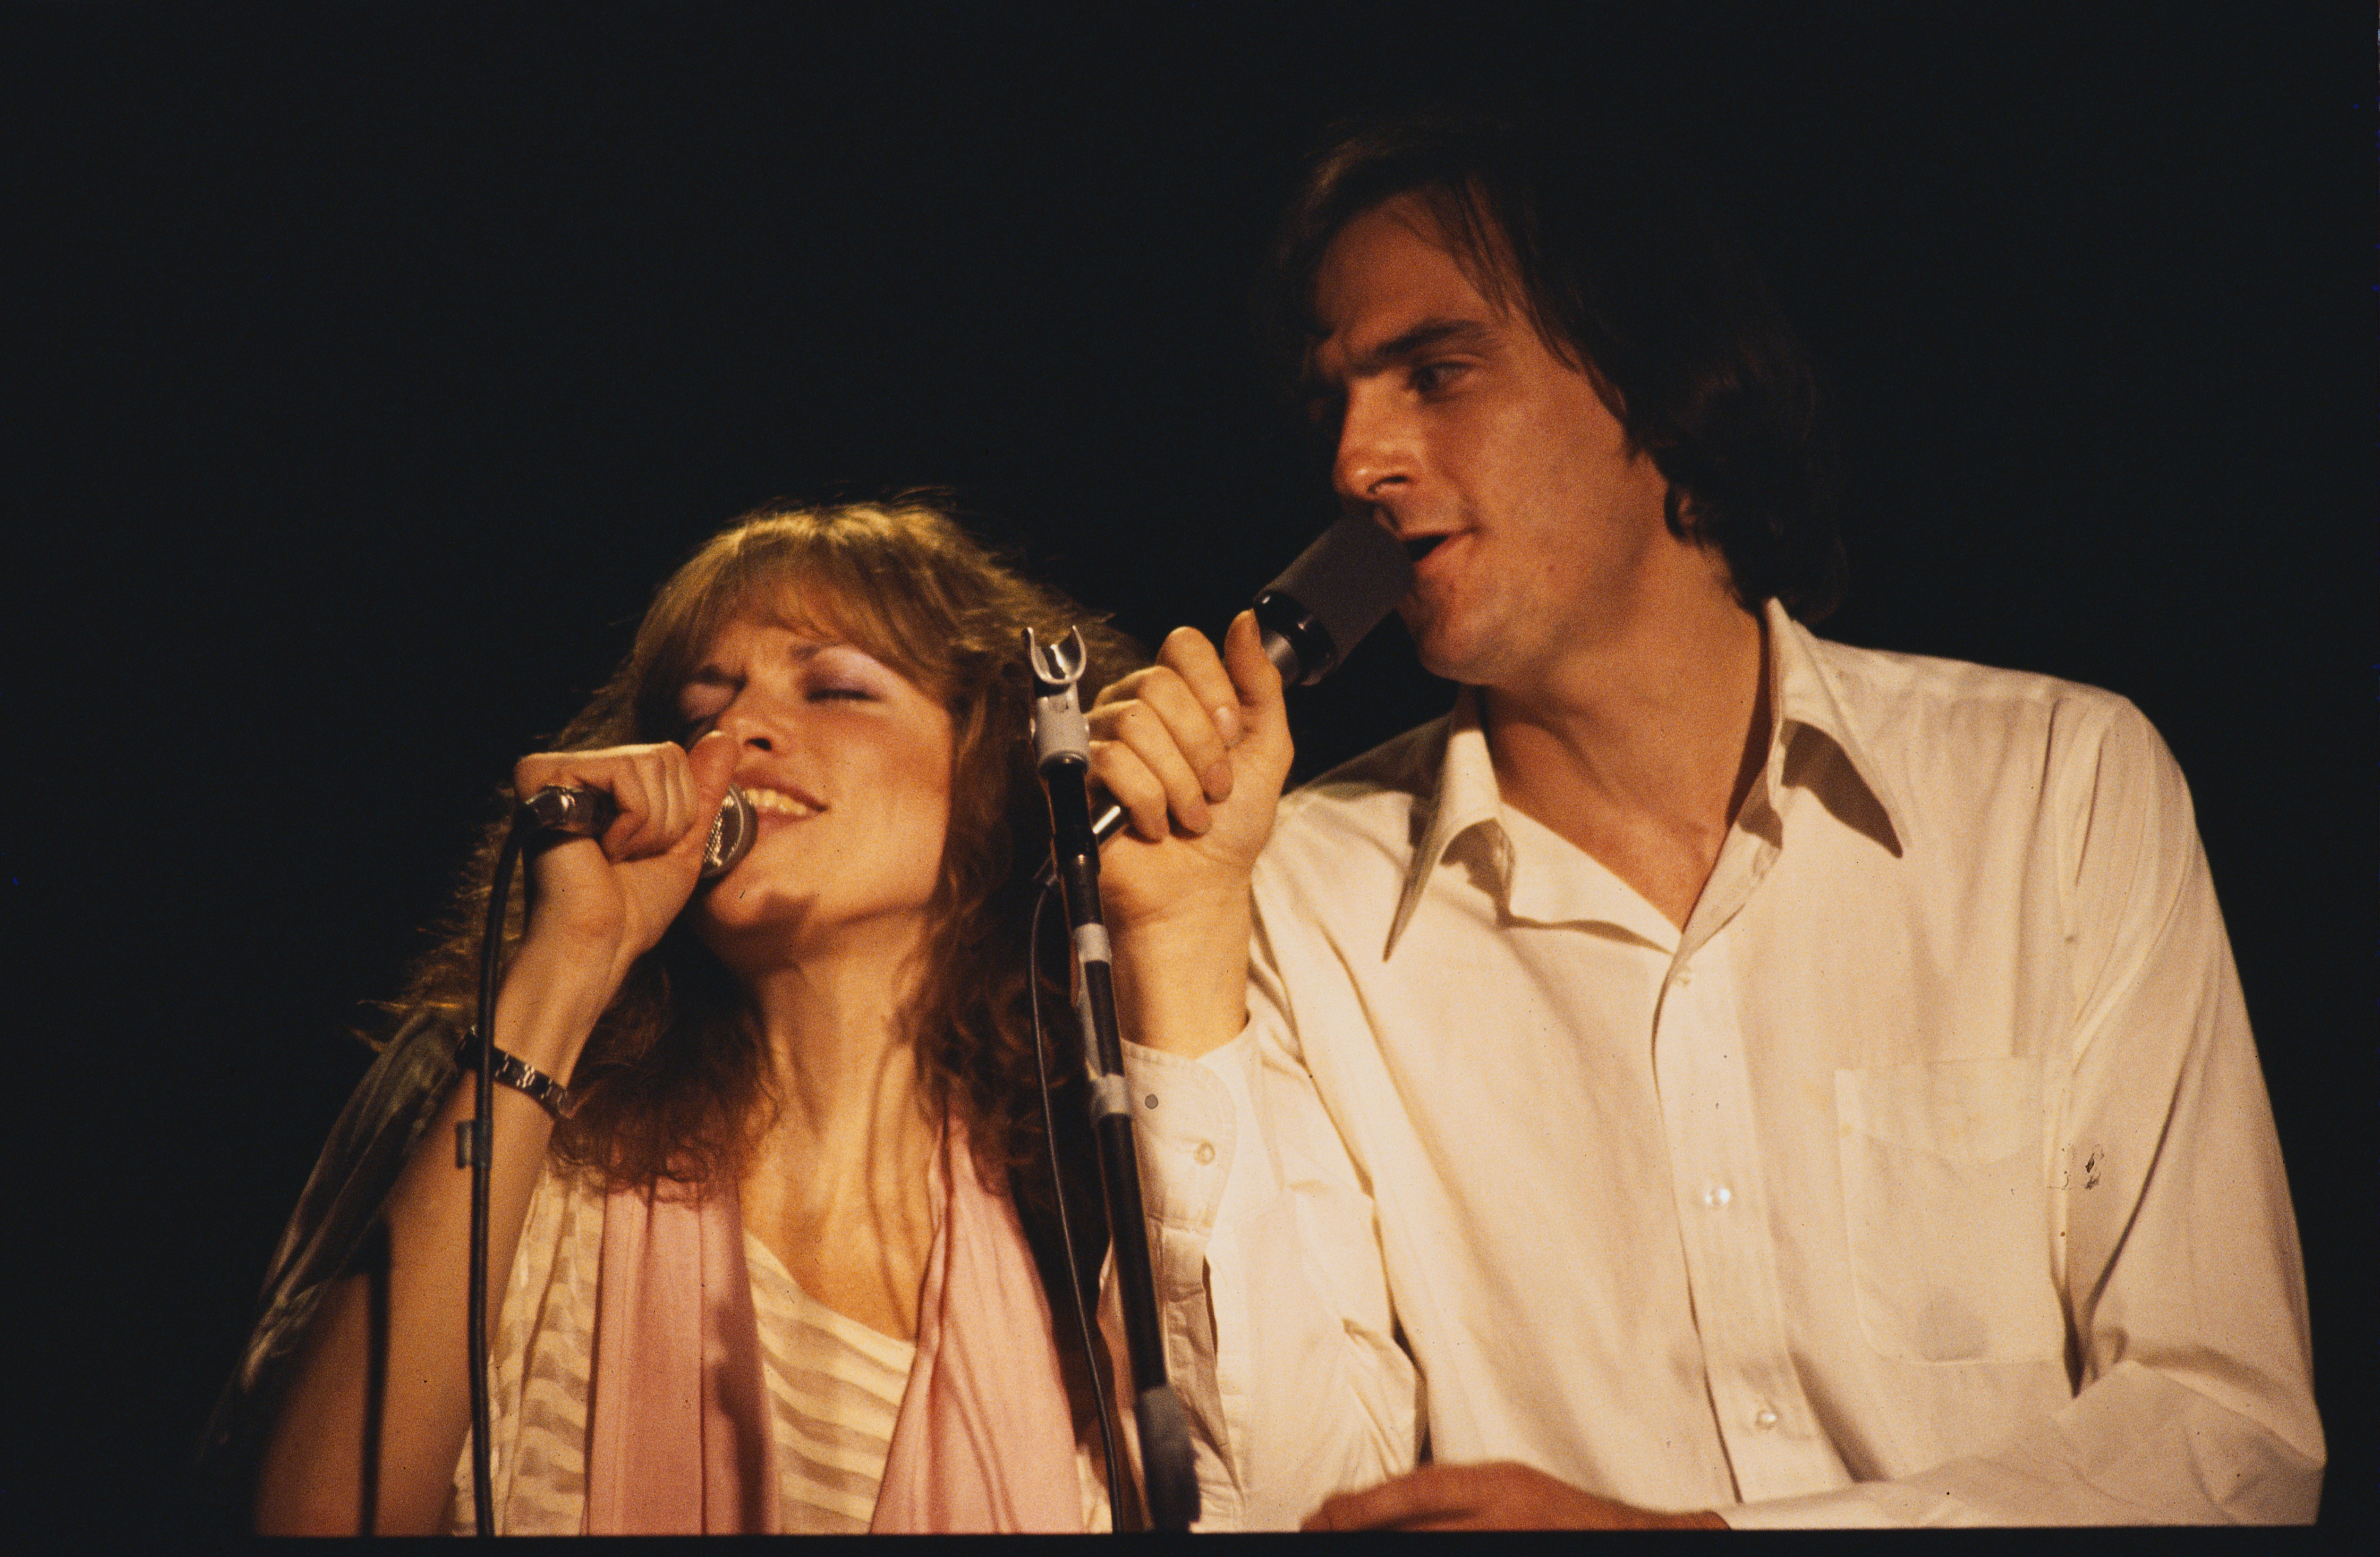 Carly Simon and James Taylor | Source: Getty Images